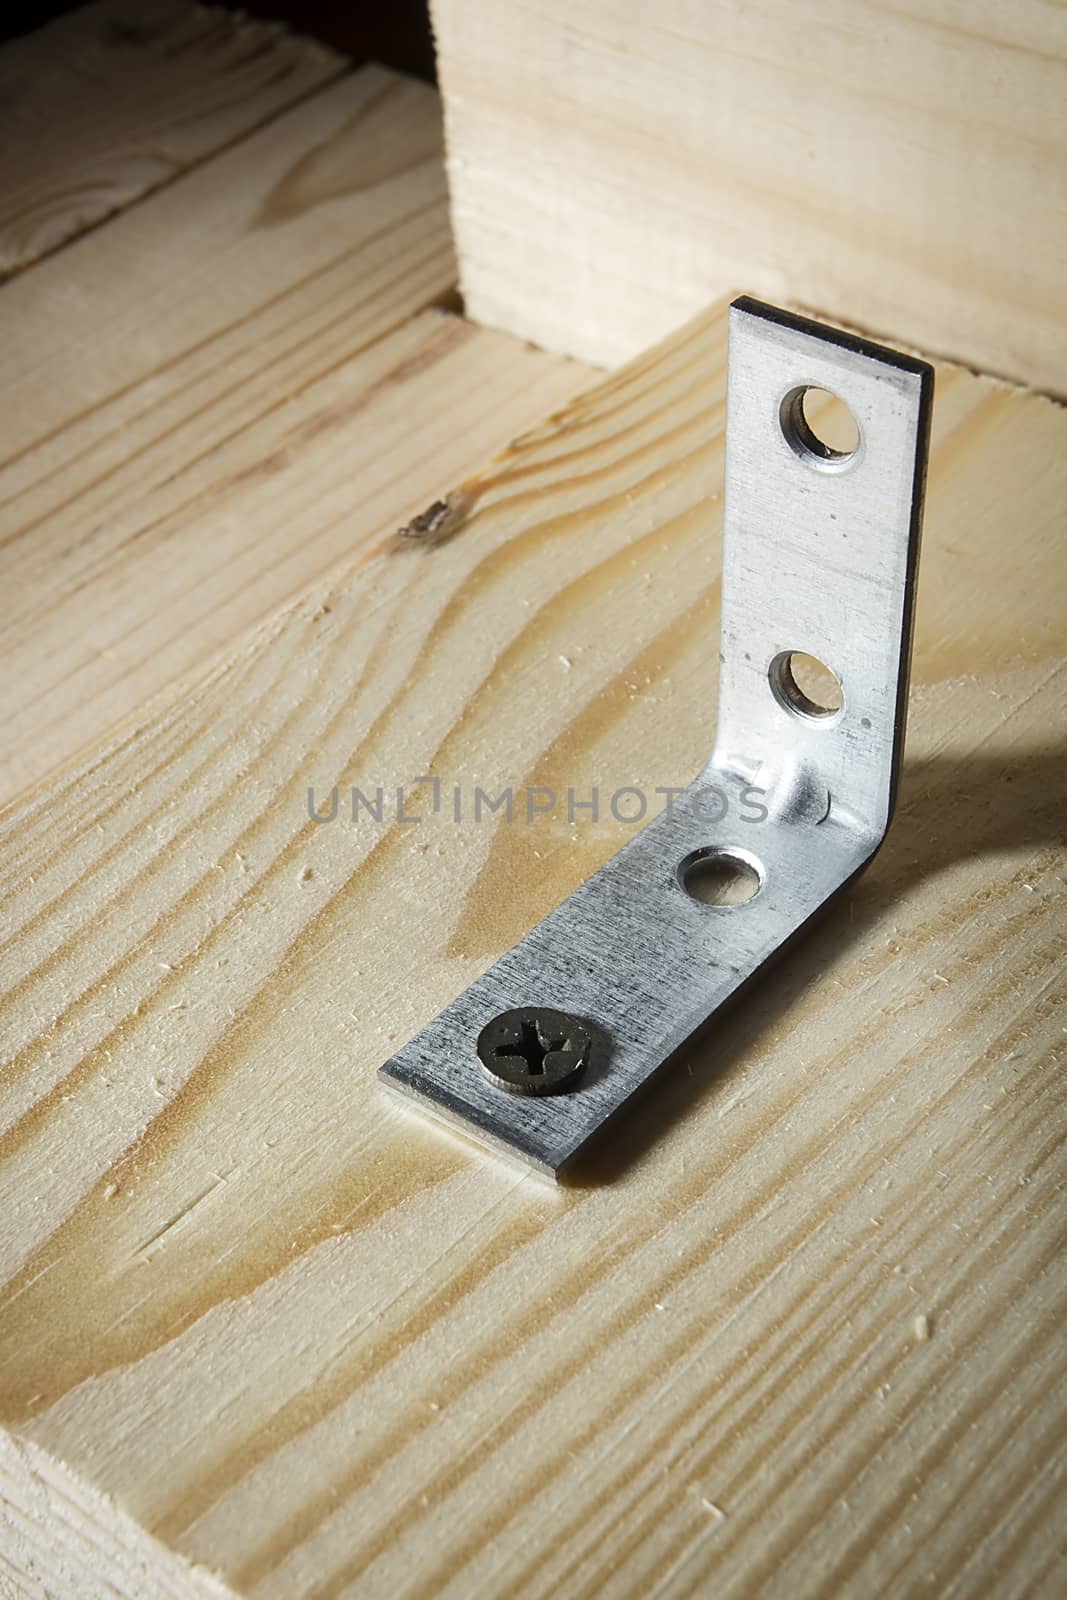 Metal corners and screws for fixing wooden boards